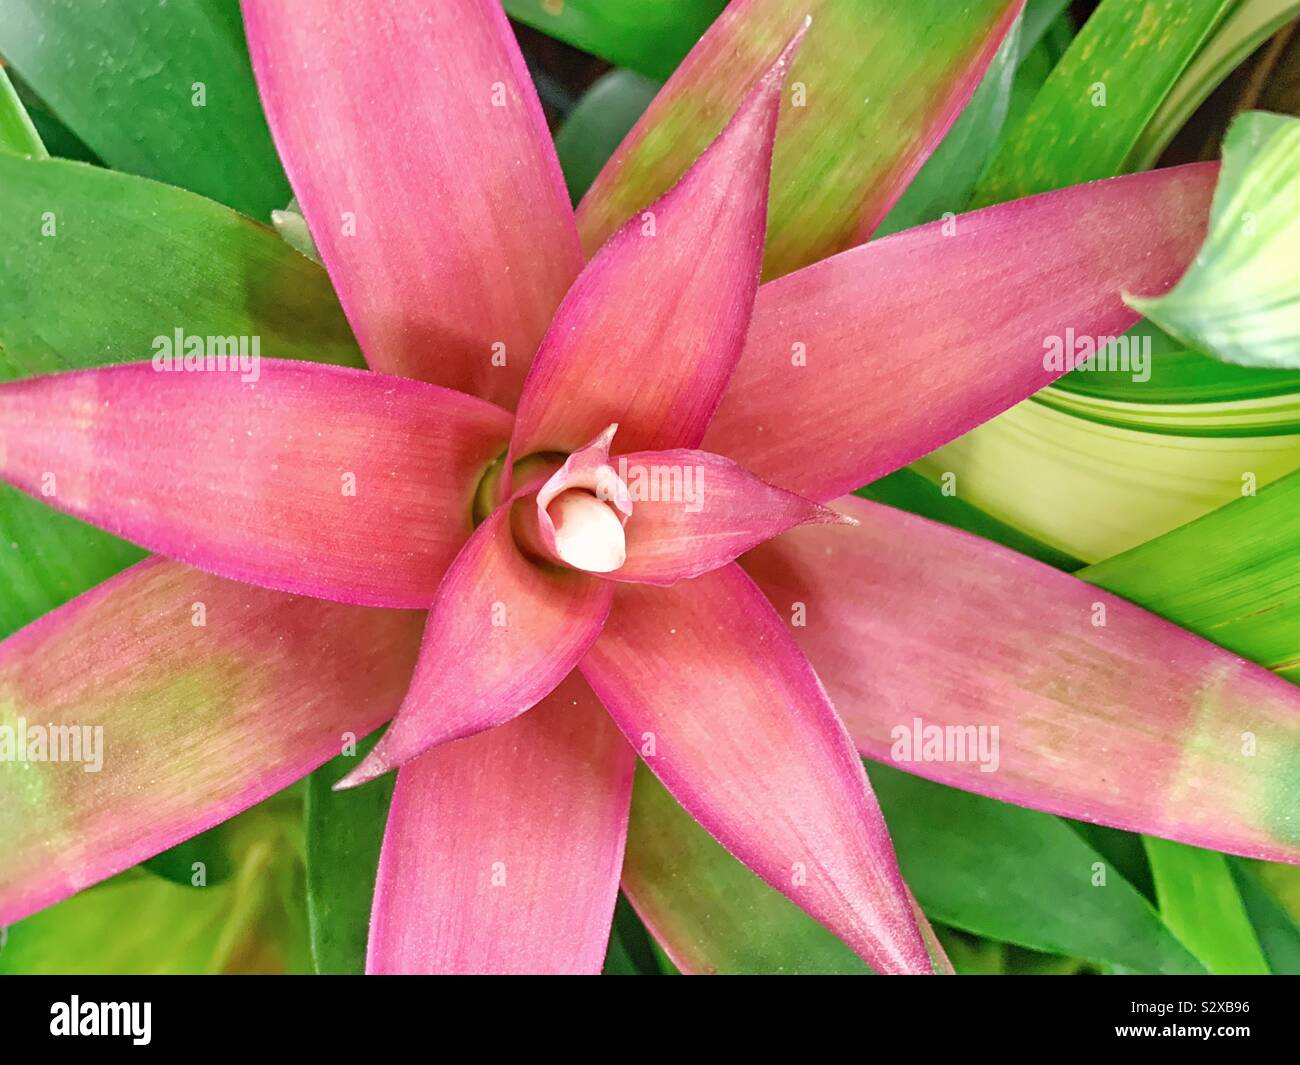 Pink and green bromeliad house plant. Stock Photo